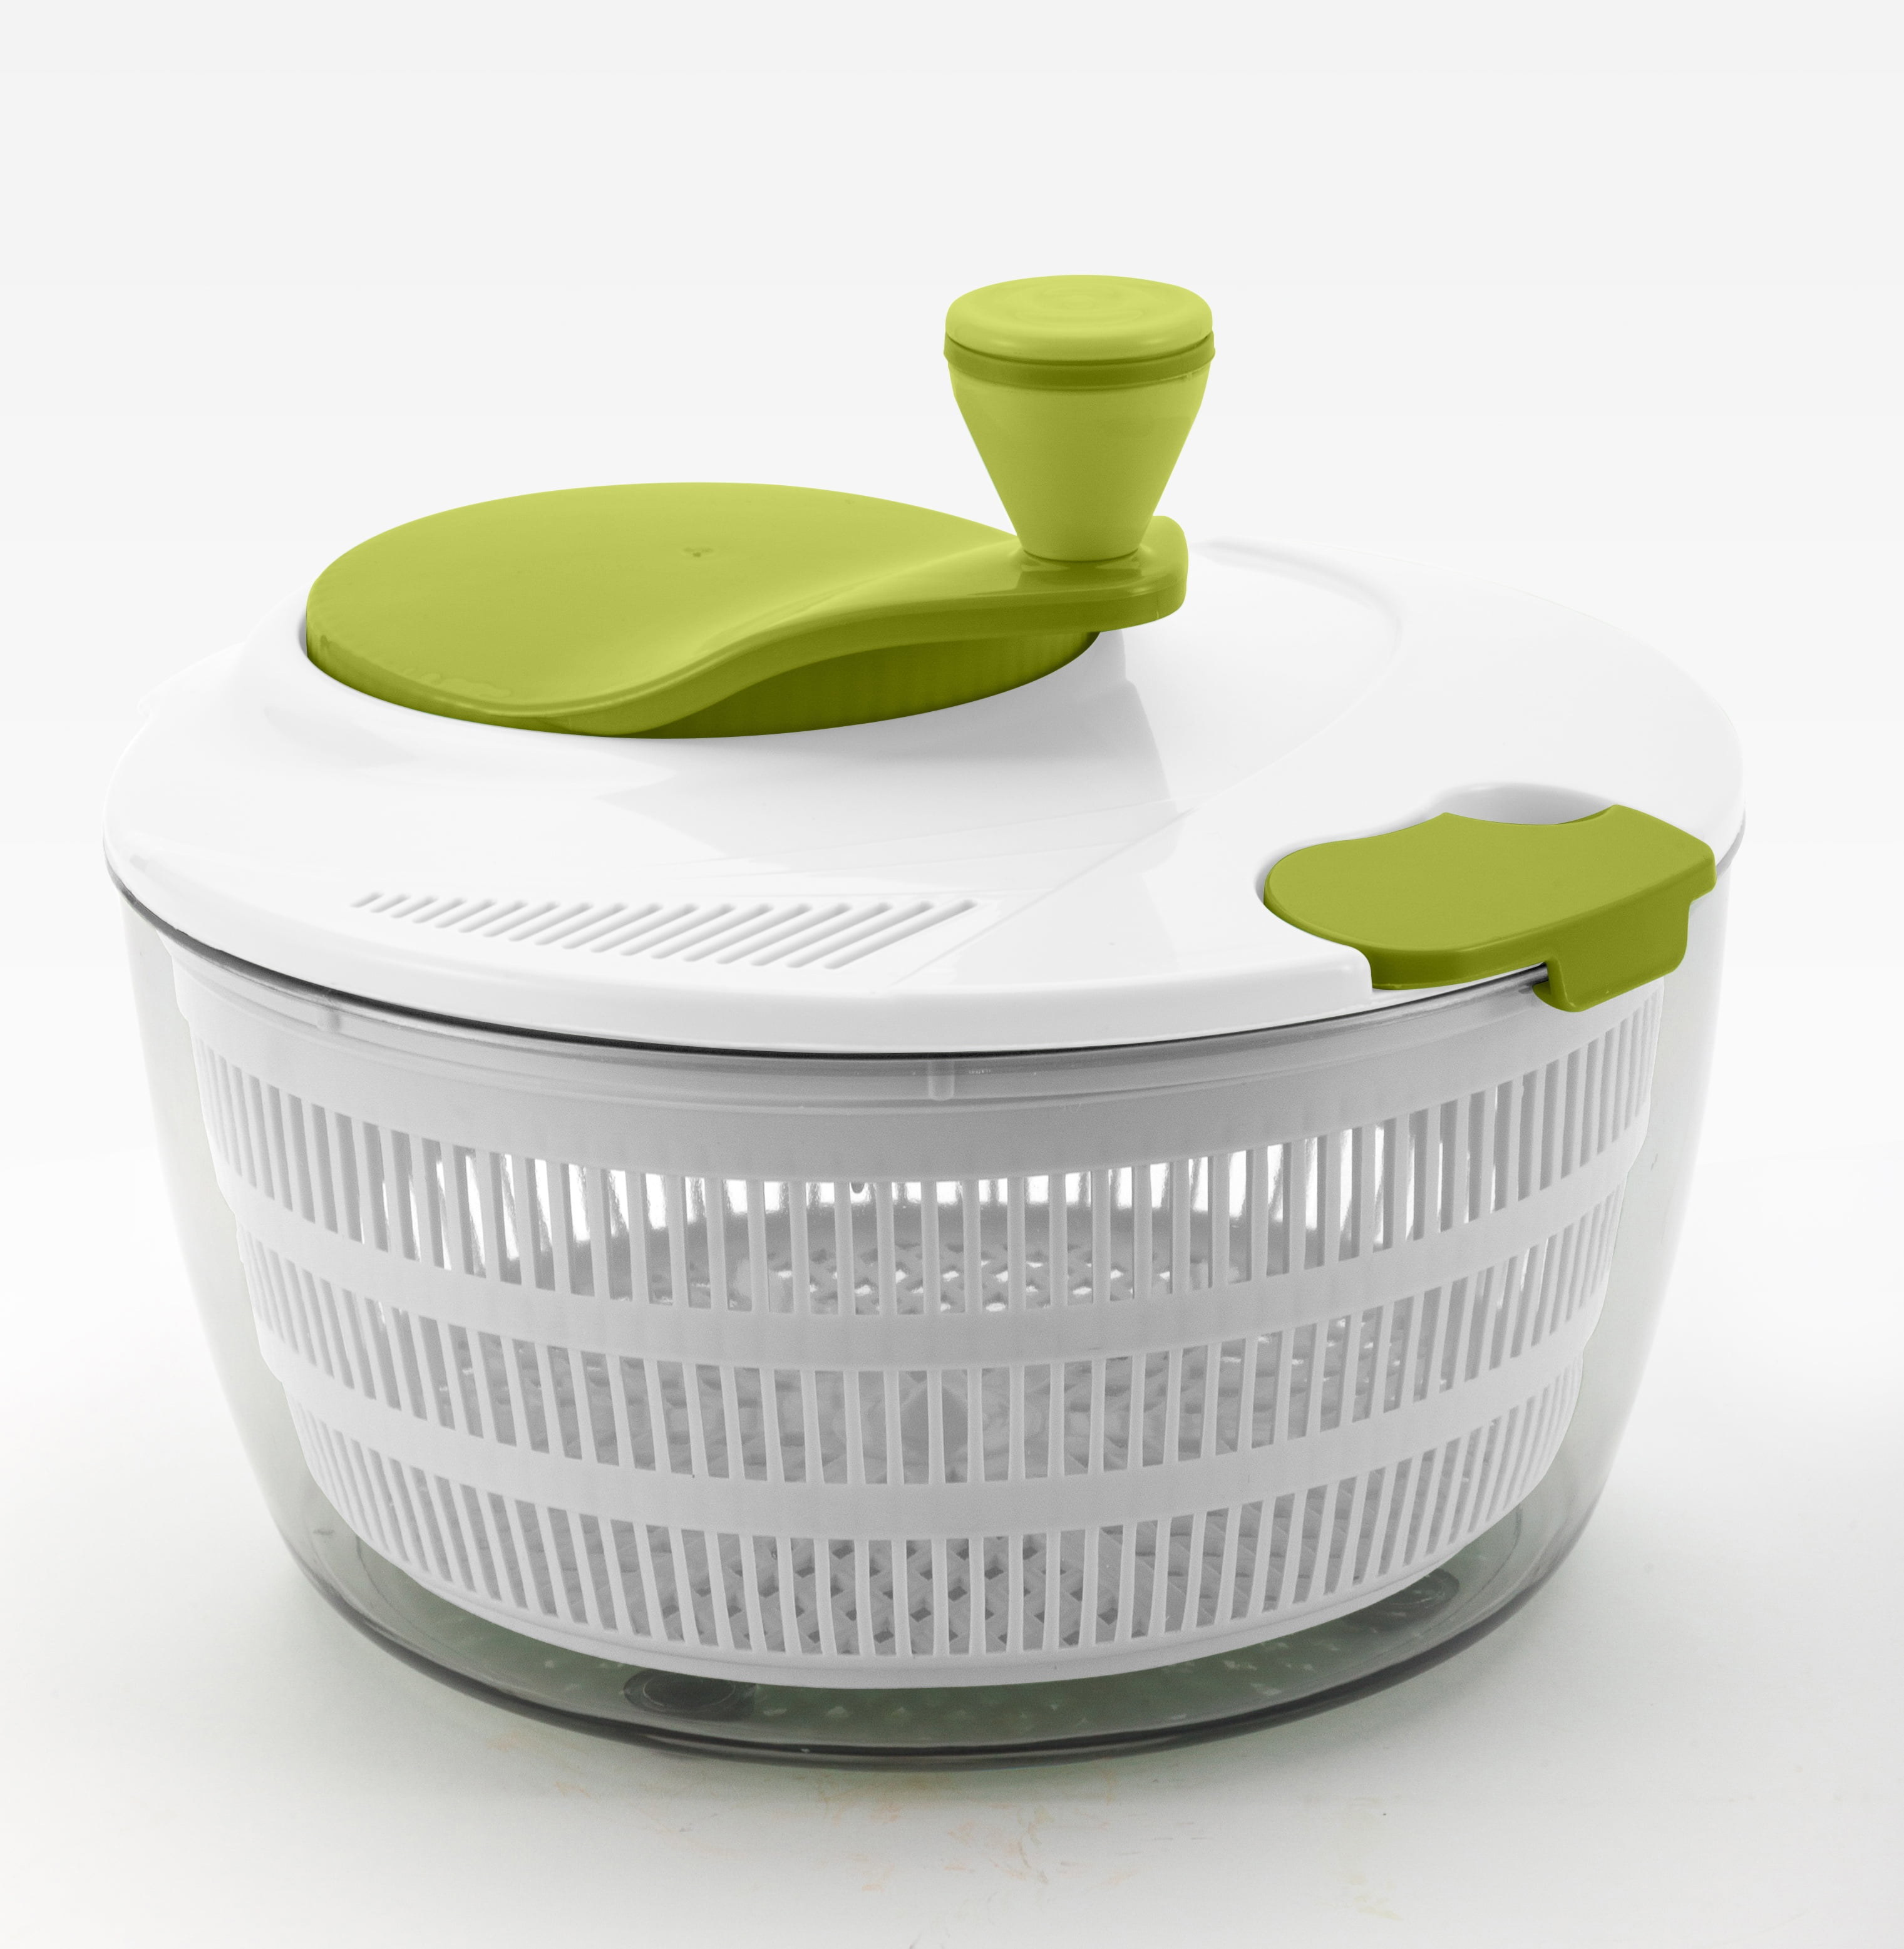 Salad Spinner Vegetable Dryer, Large Compact And Steady Hand Crank